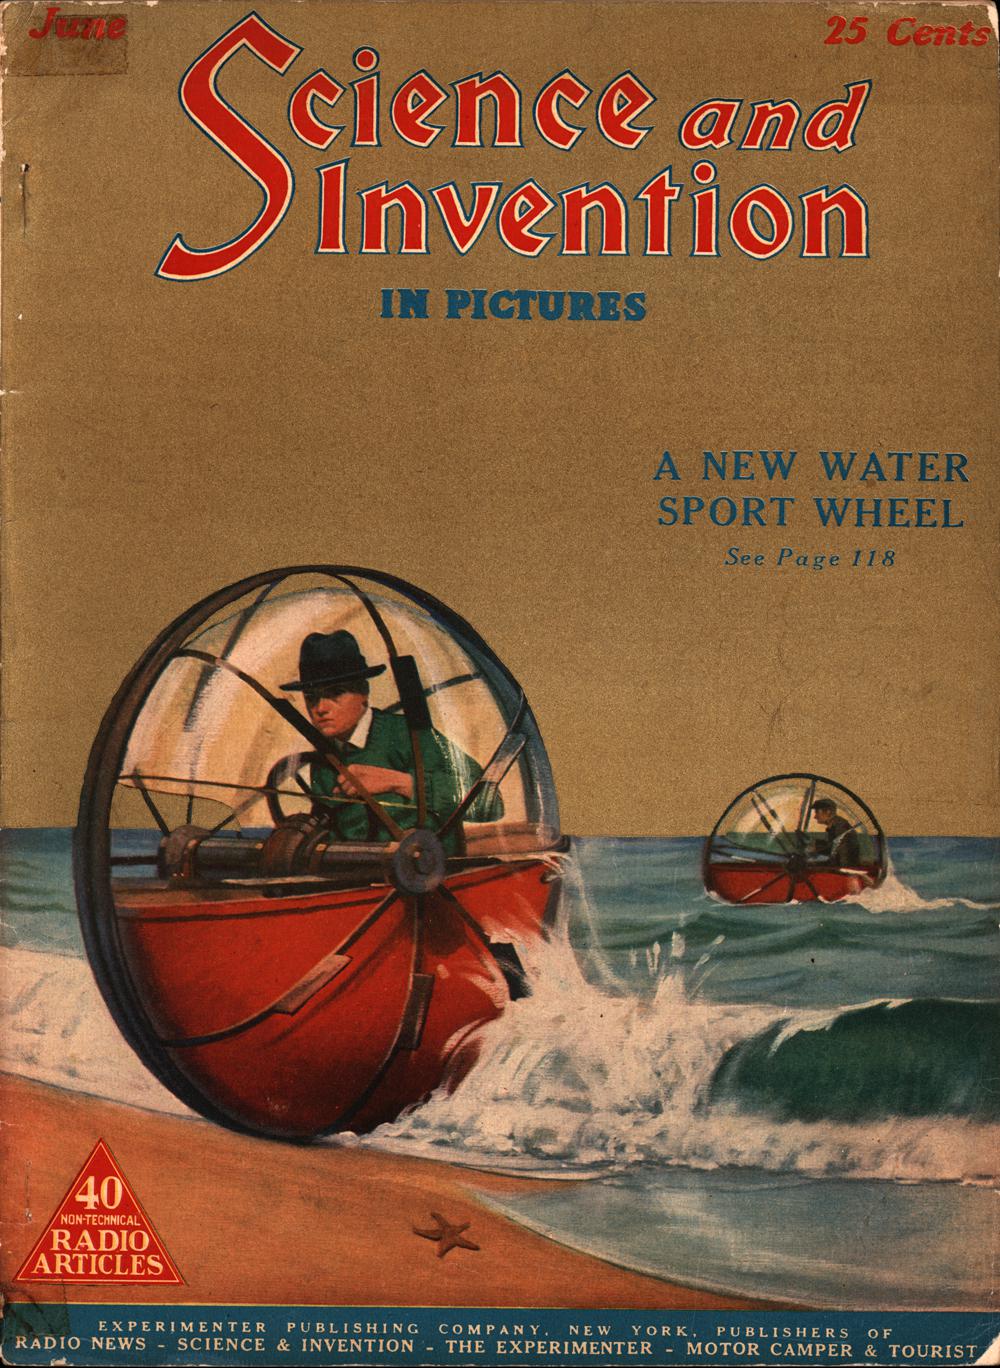 1925 - Science and invention - Vol. 13, No. 2